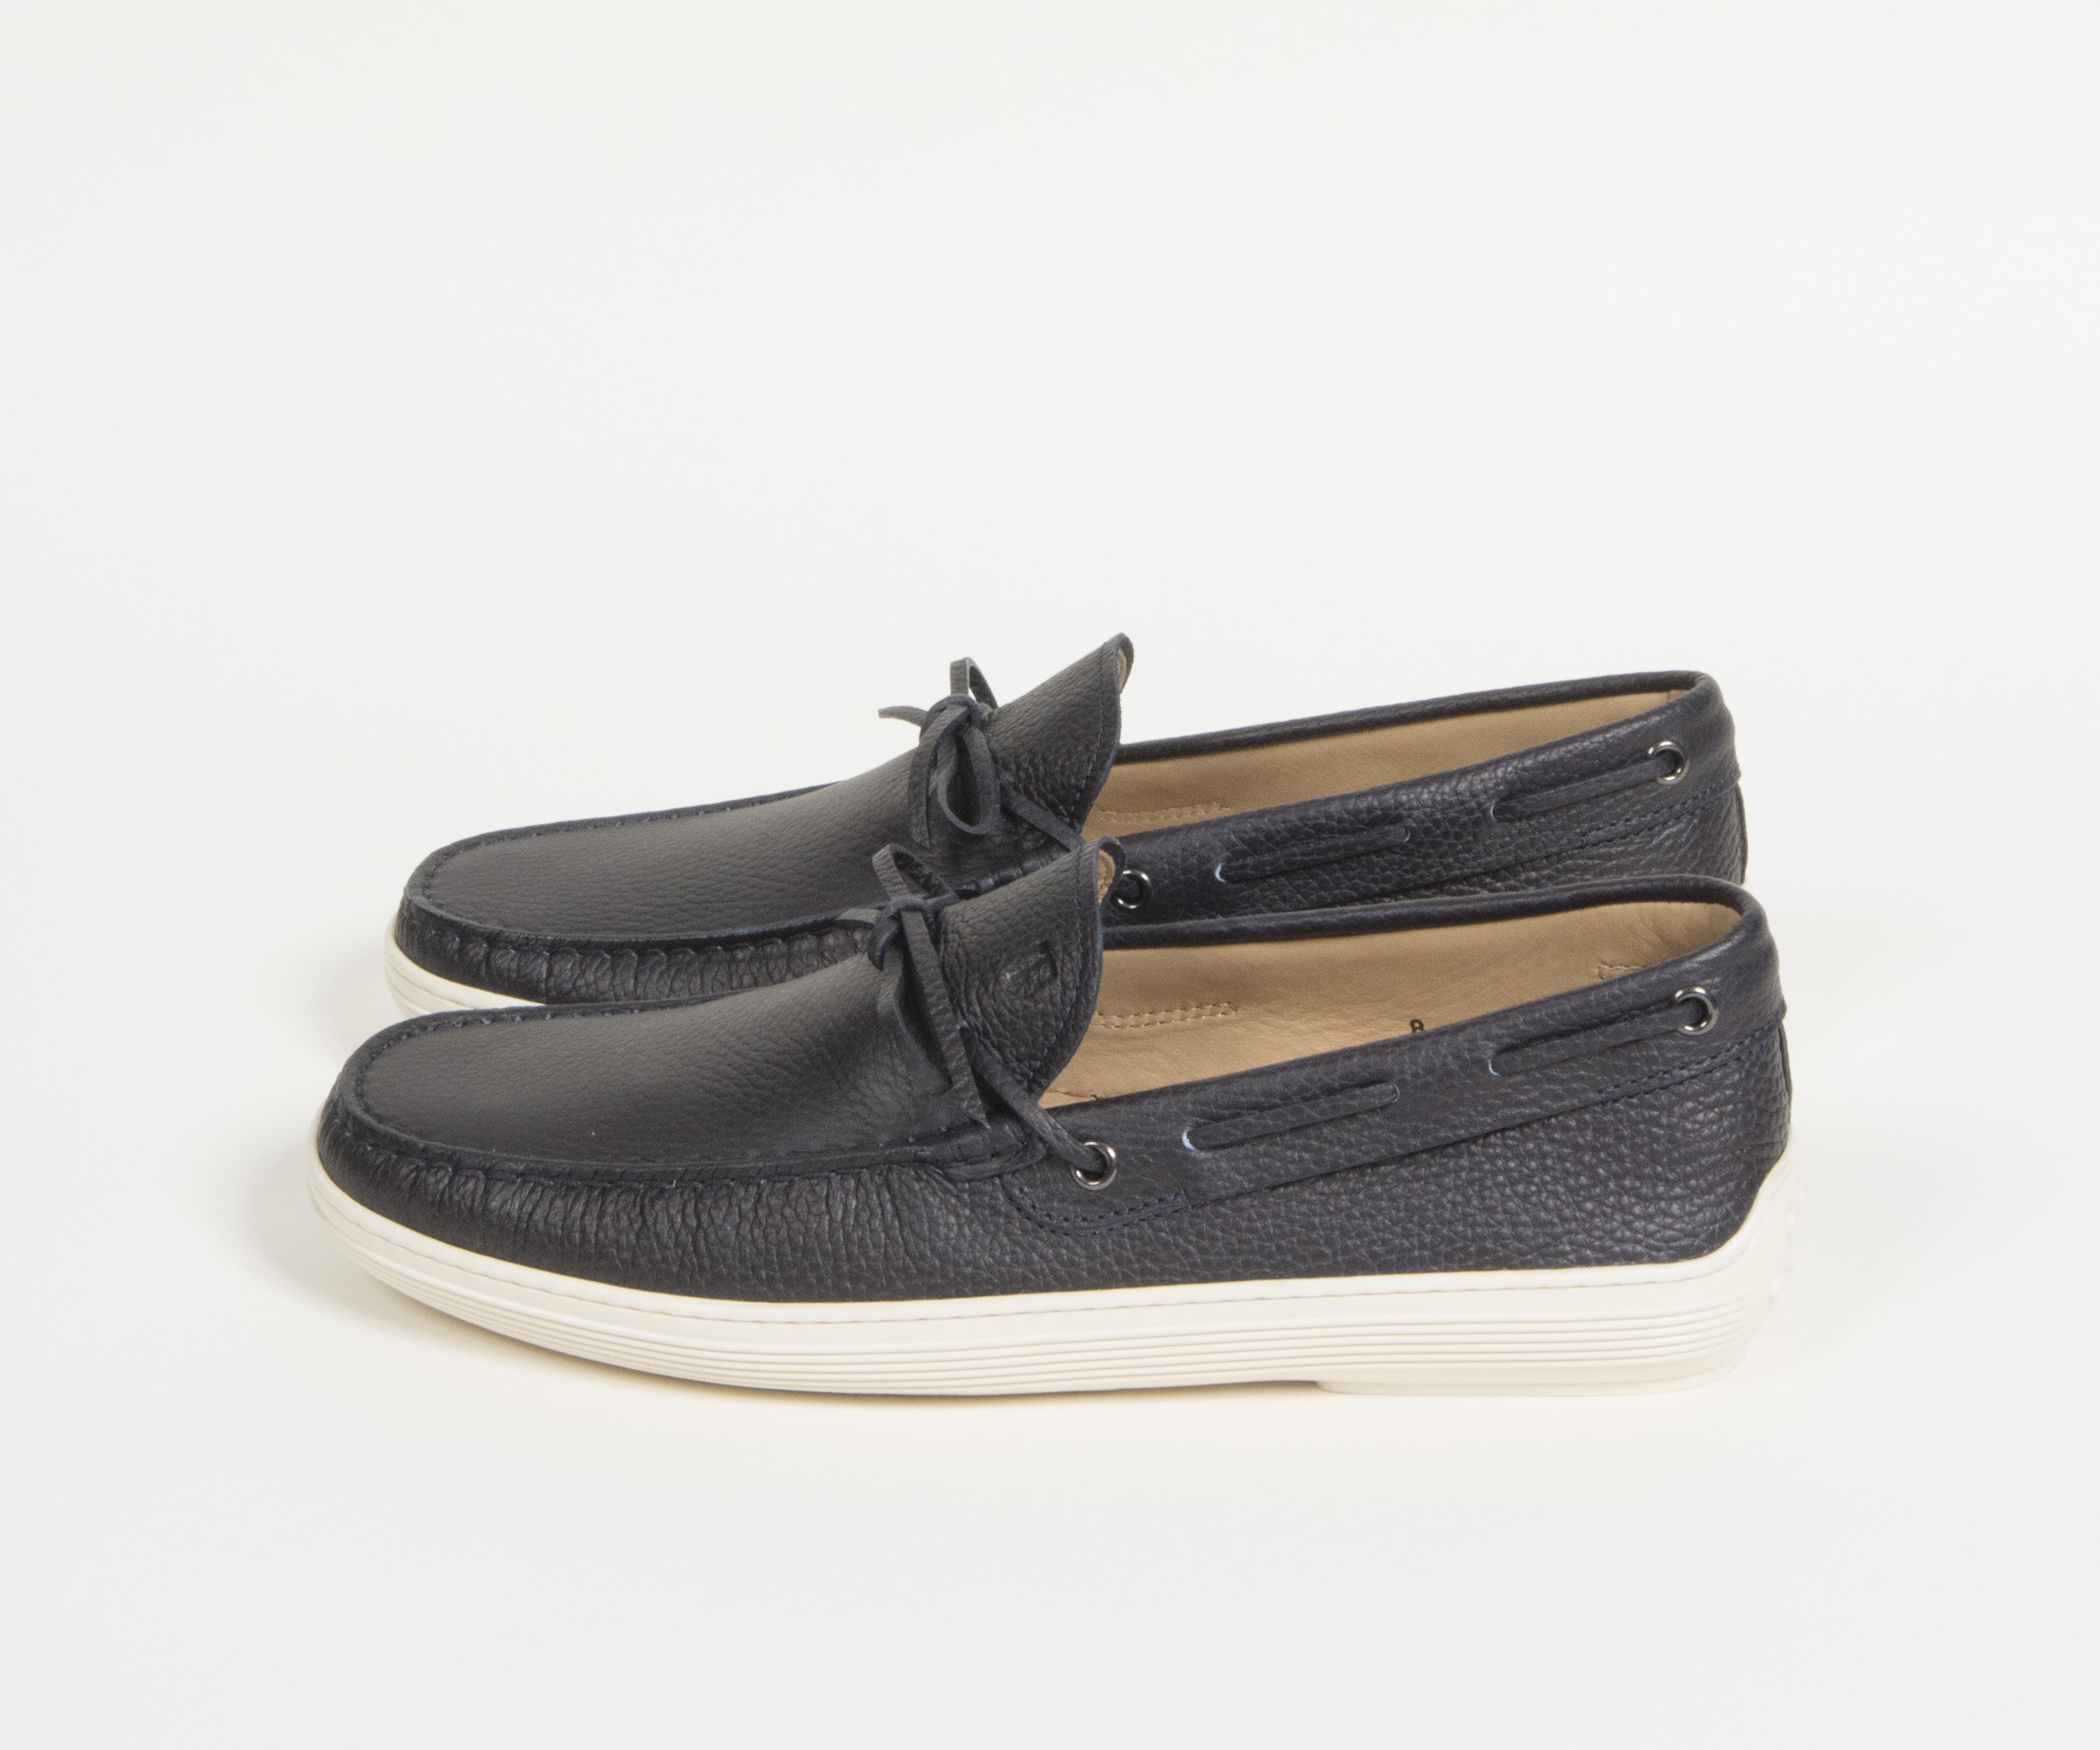 TODS Slip On Boat Shoes Navy